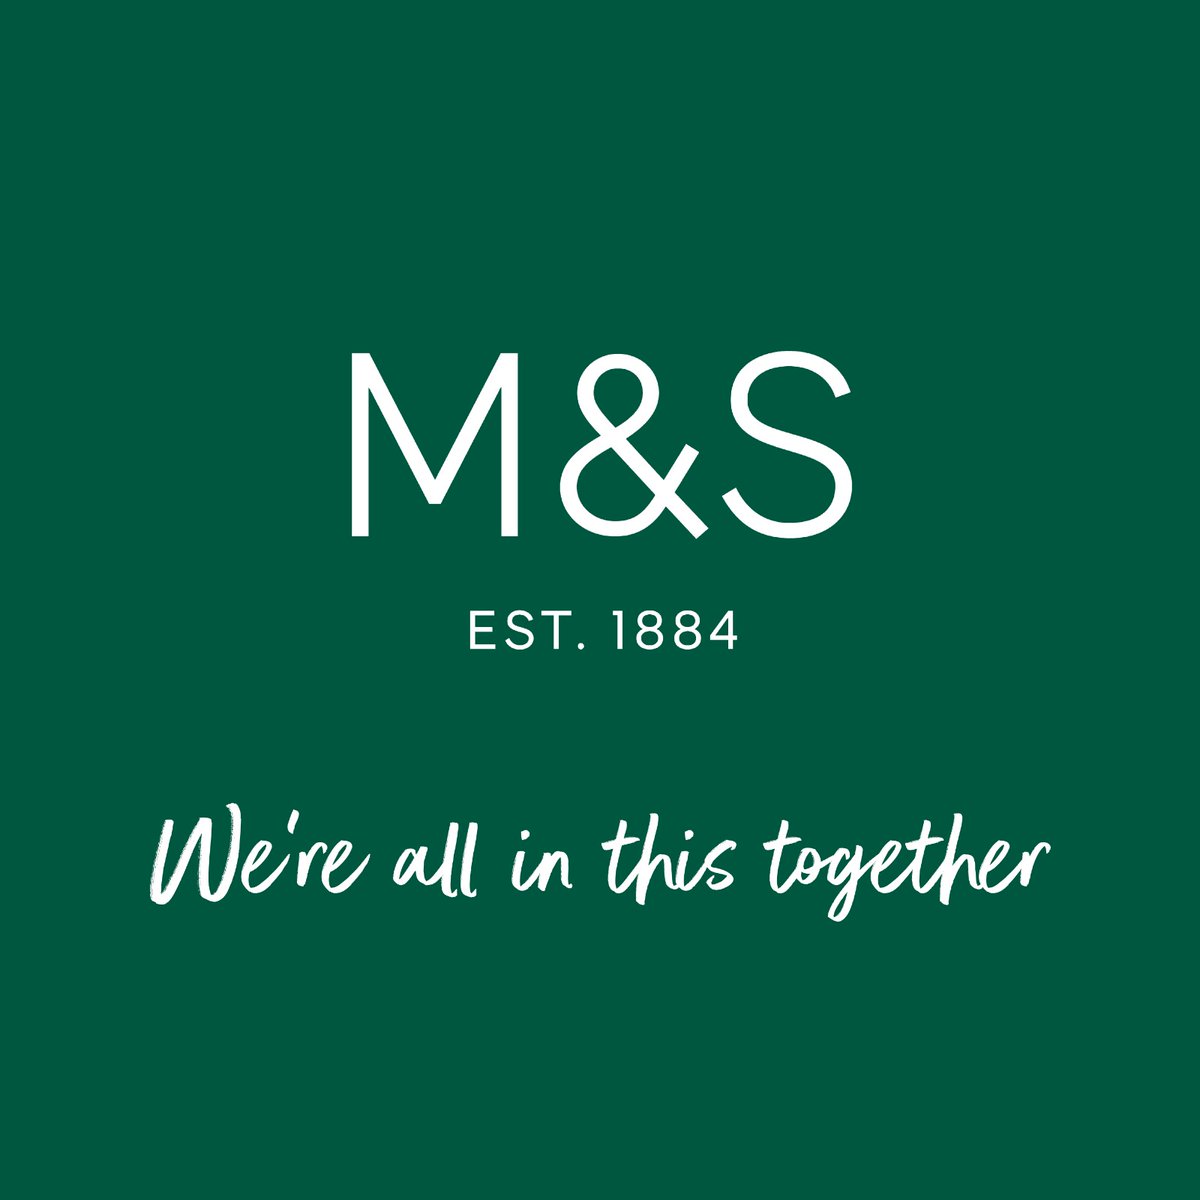 1/4 M&S is kickstarting the Neighbourly Community Fund to support those most impacted by COVID-19. This will help mobilise over 1,000 local charities to support the most vulnerable members of our communities.